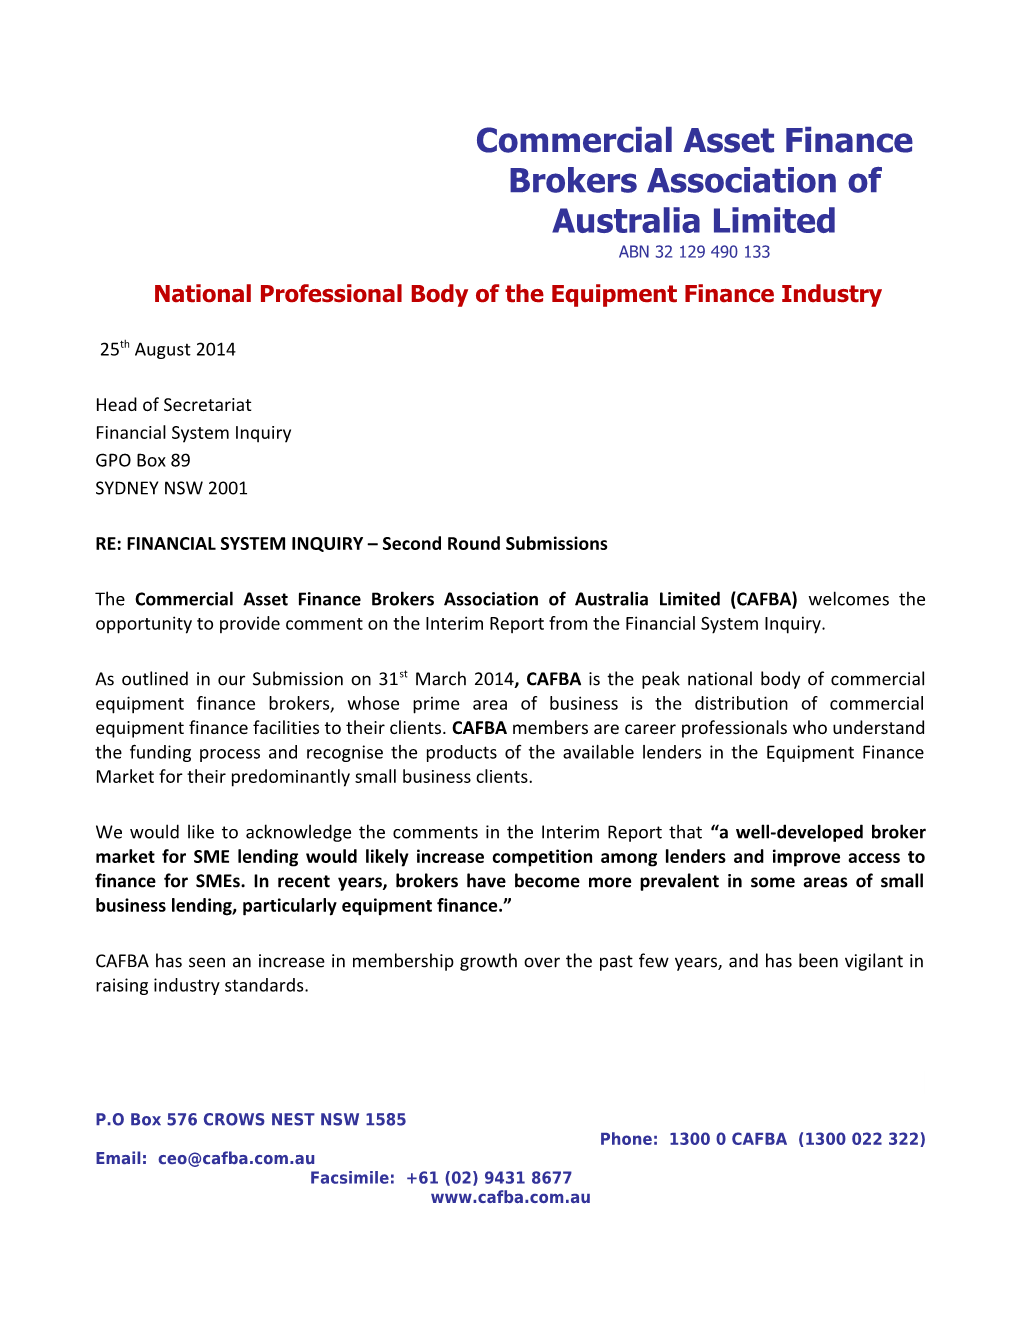 Commercial Asset Finance Brokers Association of Australia (CAFBA) - Submission to the Financial